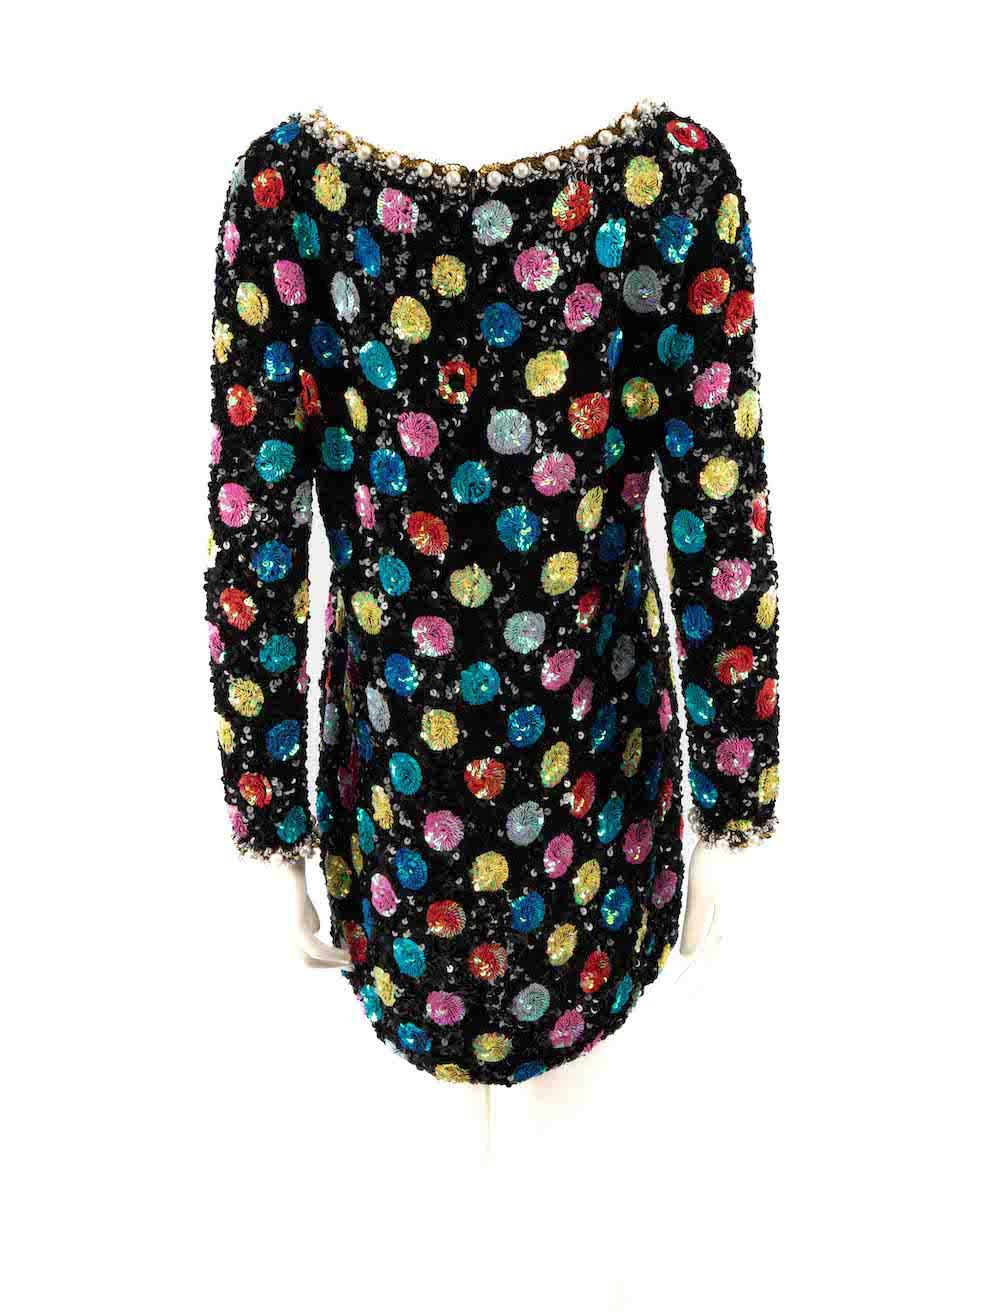 Ashish Polka Dot Sequin Faux Pearl Trim Mini Dress Size L In Good Condition For Sale In London, GB